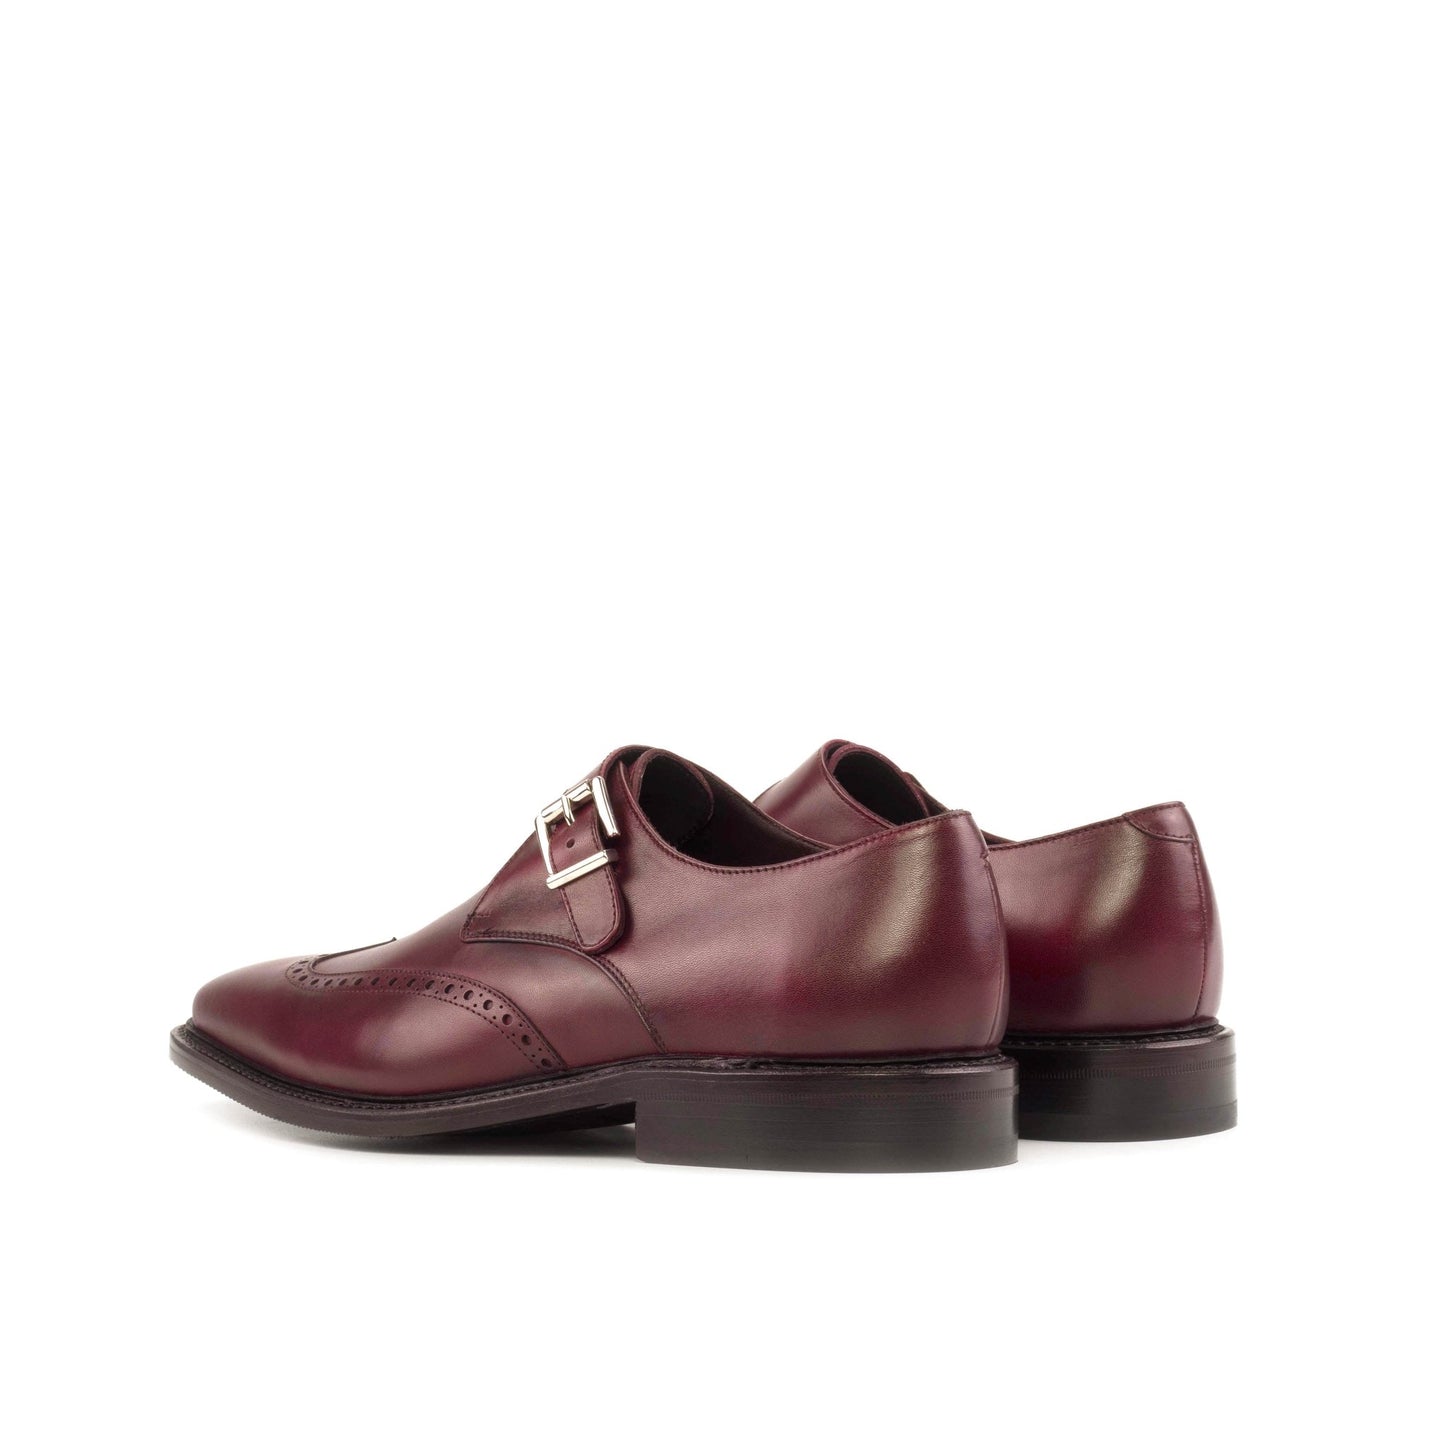 Single Monk in Burgundy Box Calf - Zatorres | Free Shipping on orders over $200